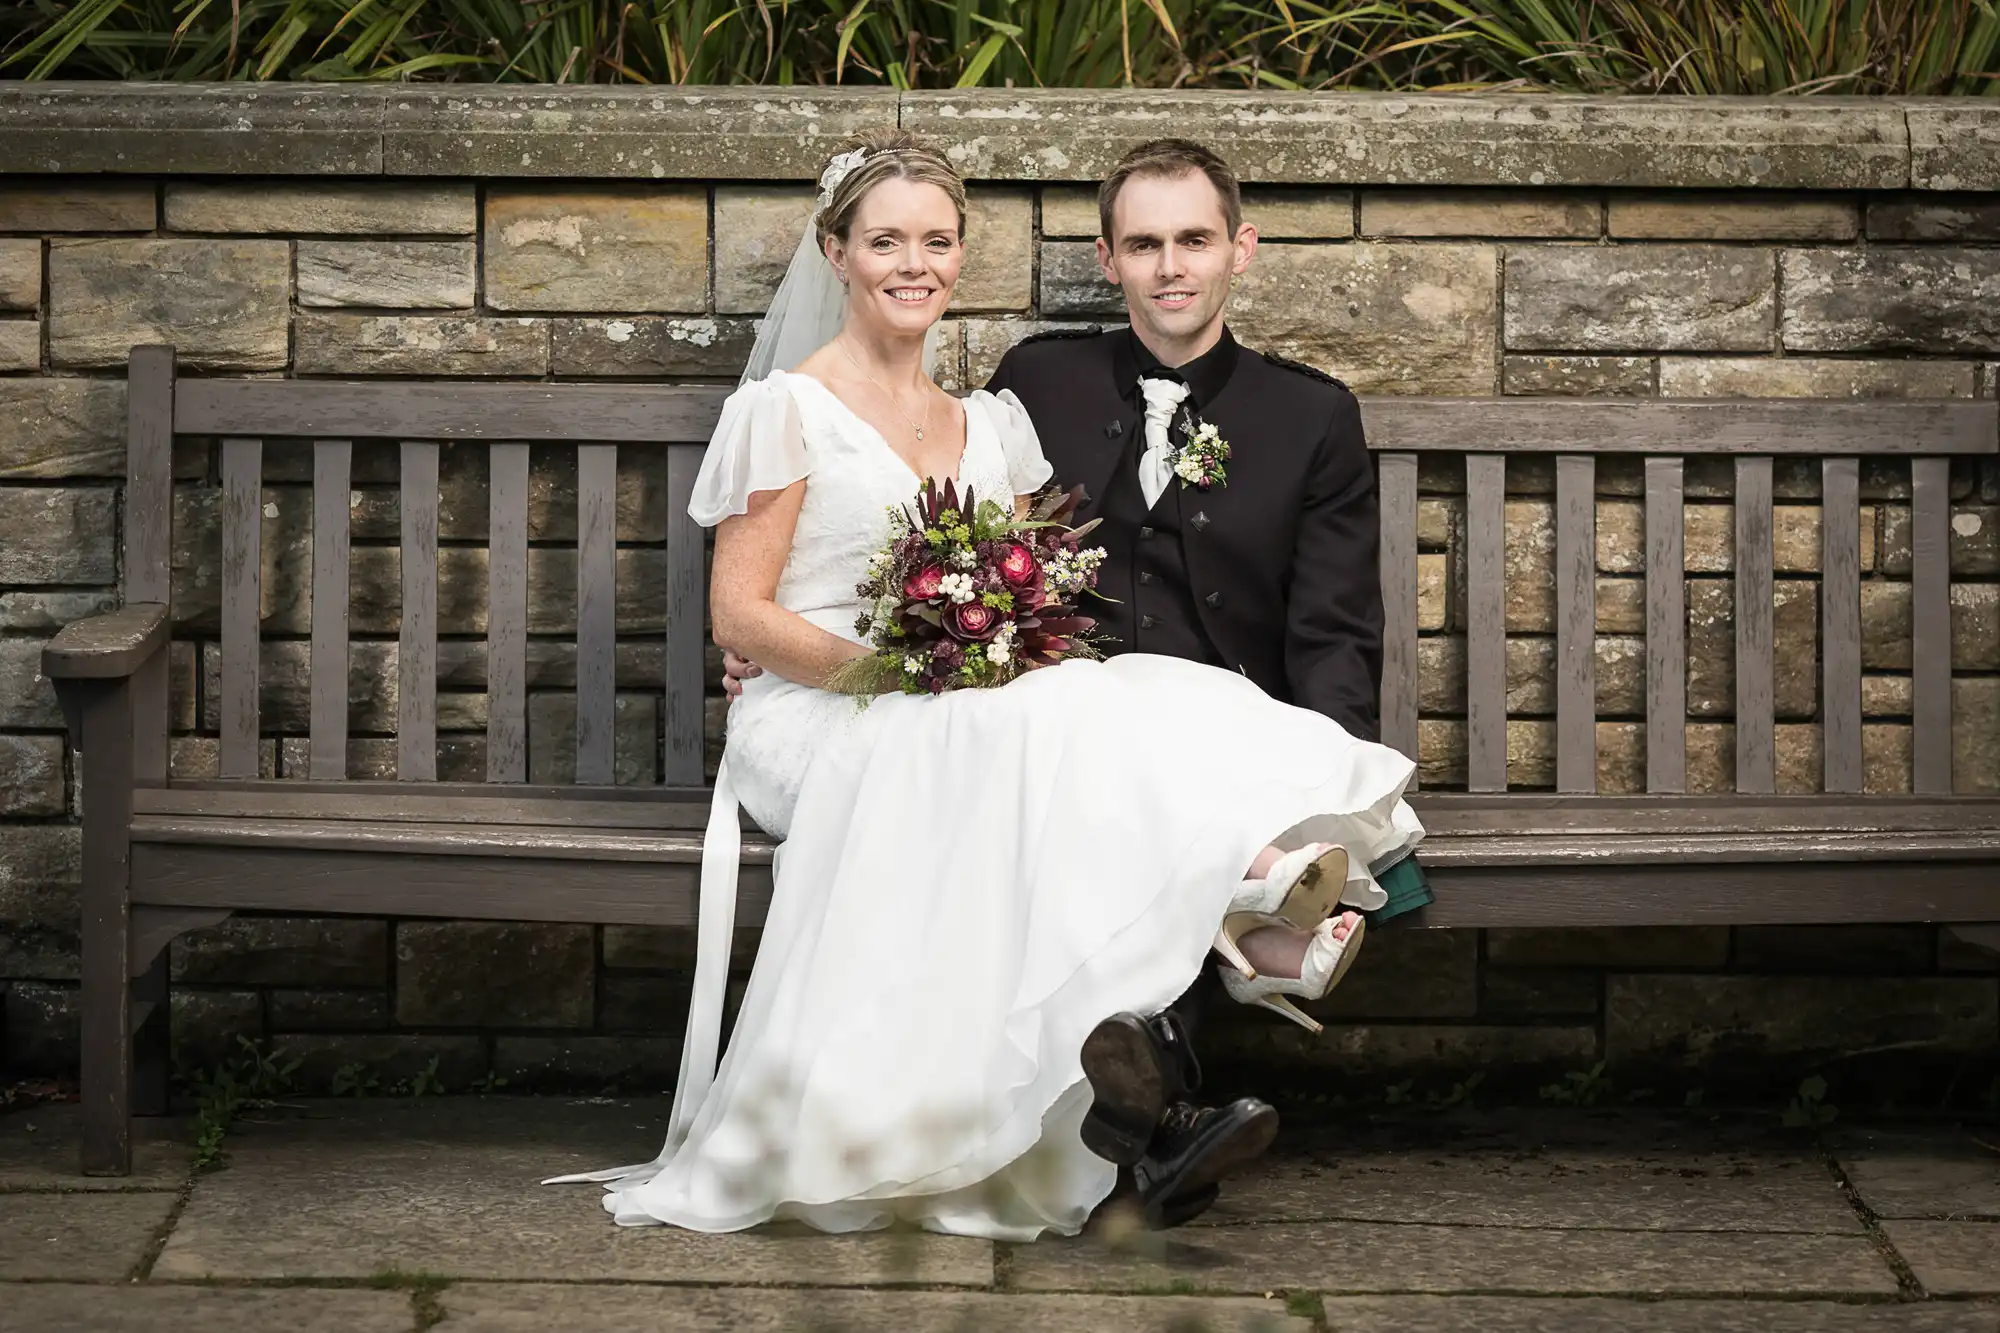 A bride and groom sitting on a bench, the bride in a white gown holding a bouquet and the groom in a dark suit, both smiling.